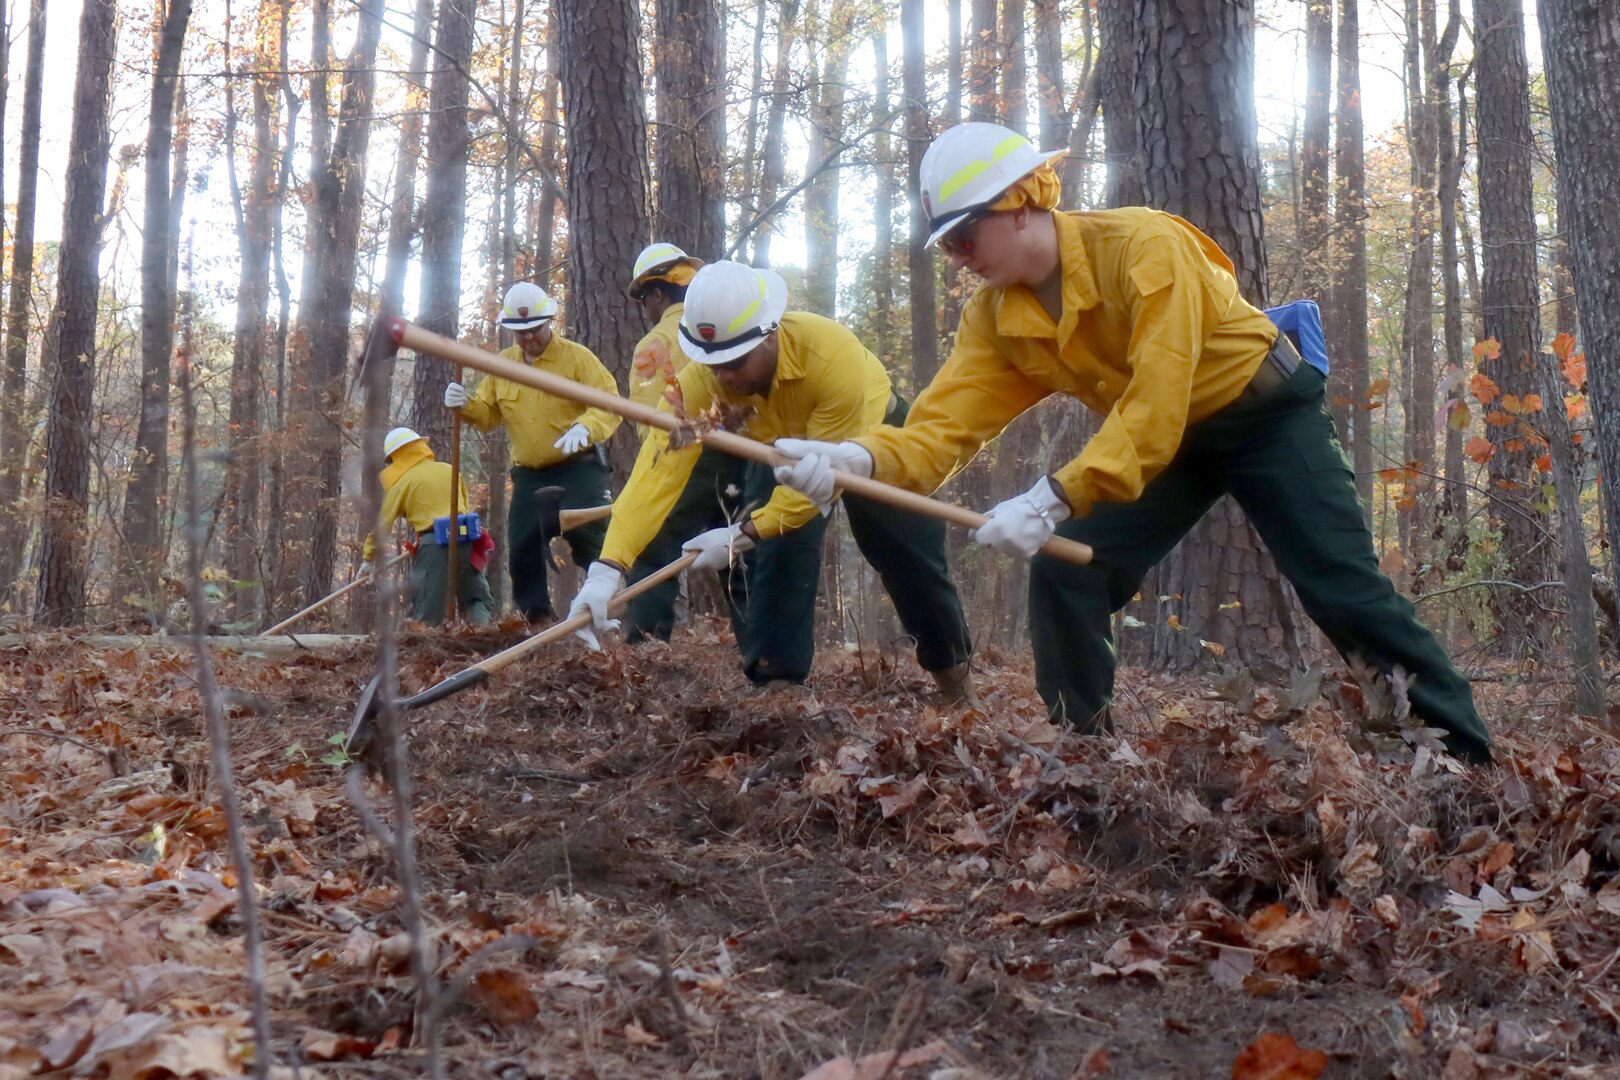 VNG ends aerial fire suppression missions, starts training ground crews